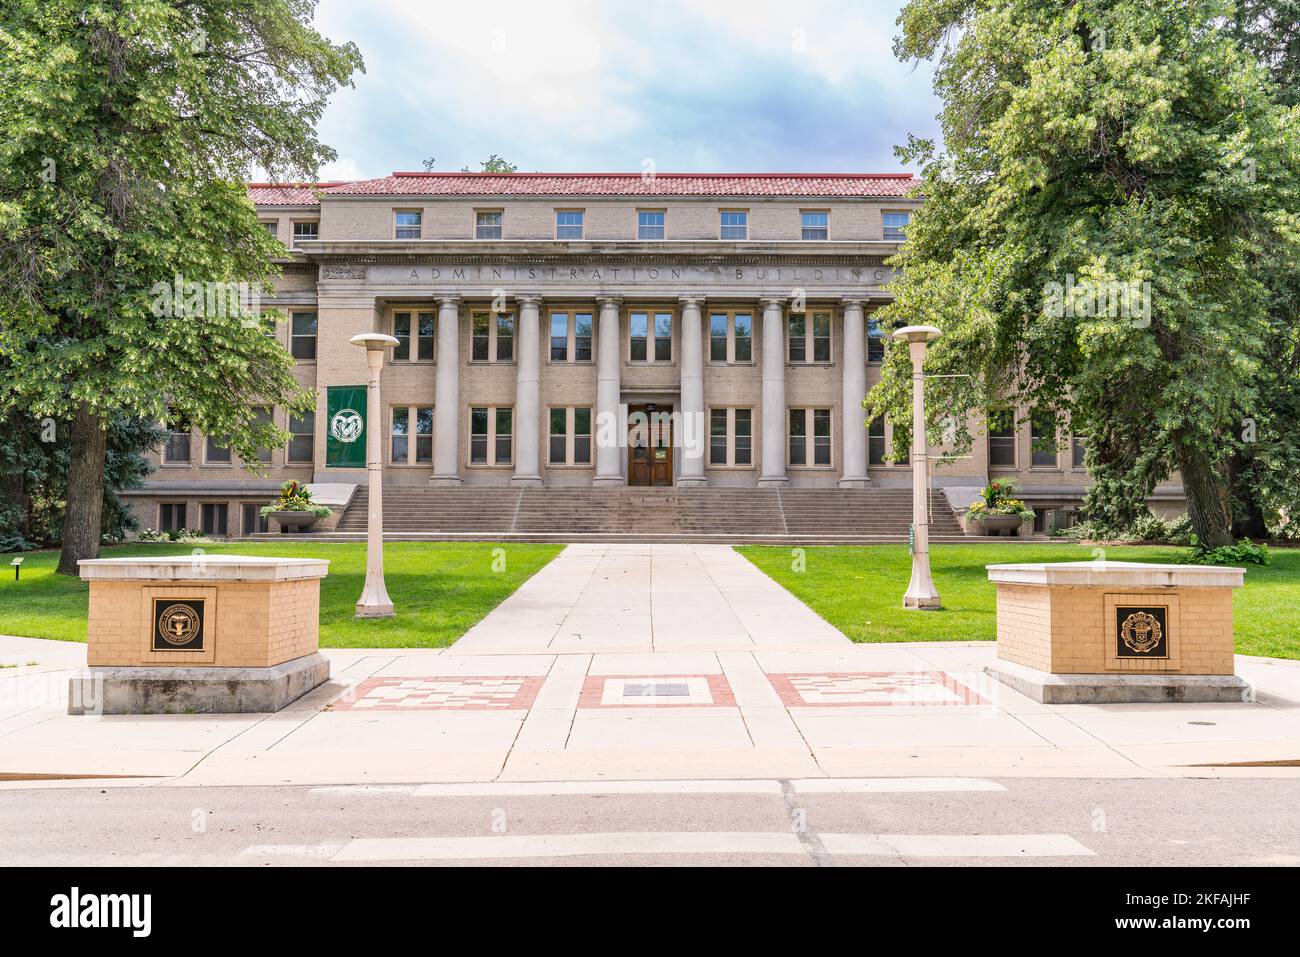 Fort Collins, CO - July 16, 2022: Exterior of the Administrative Building of Colorado State University in Fort Collins, Colorado Stock Photo